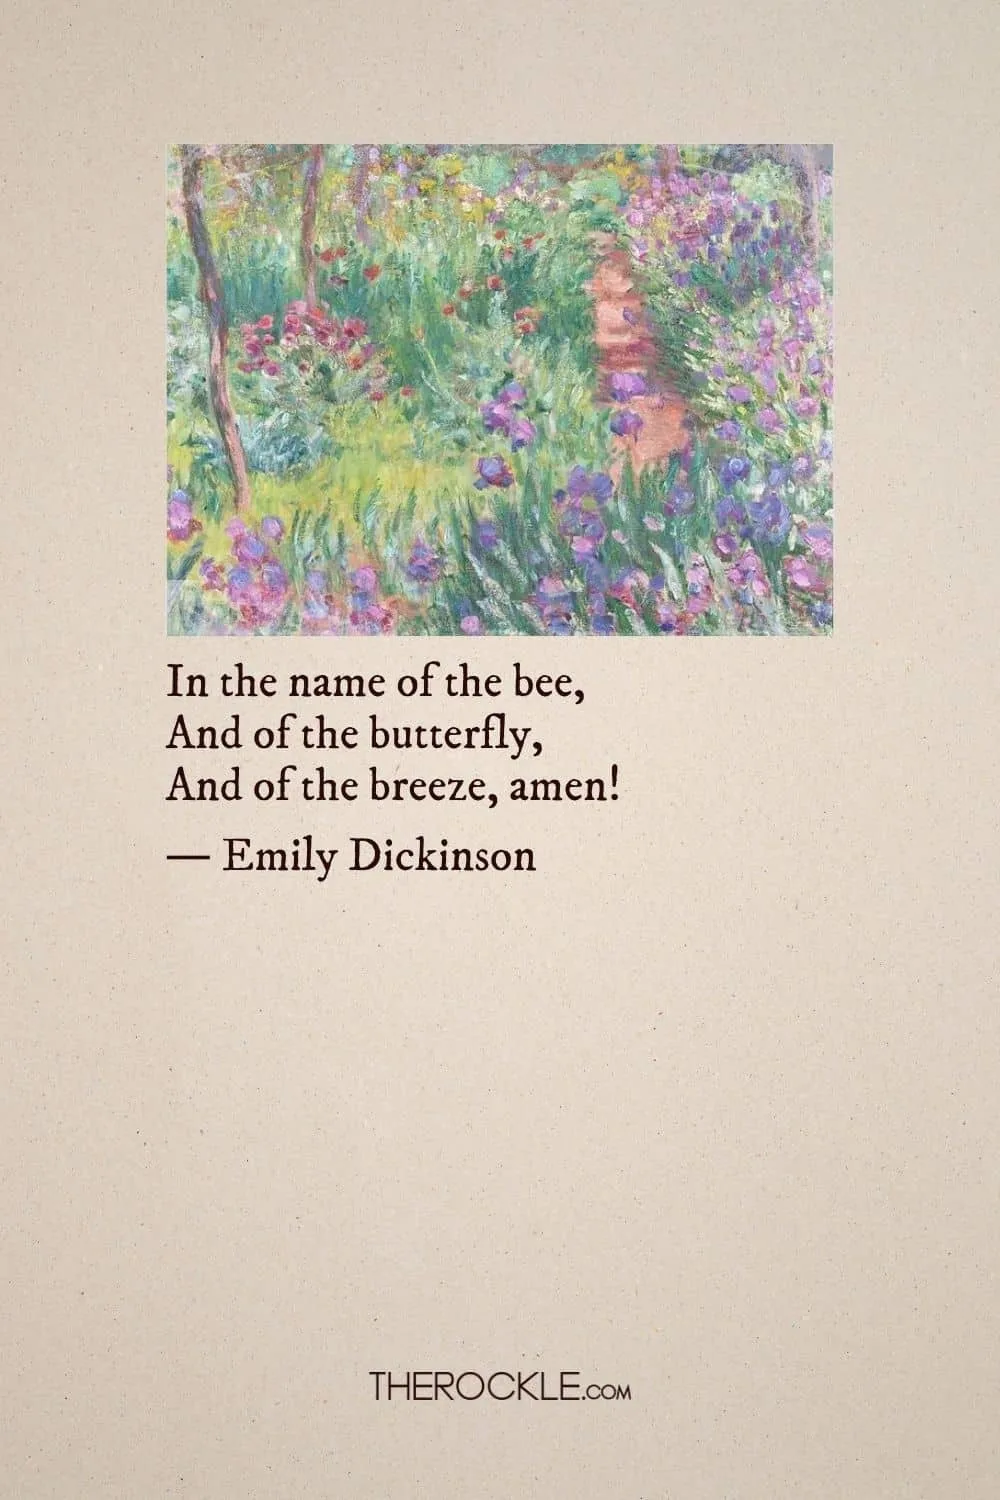 Emily Dickinson quote about the beauty of nature